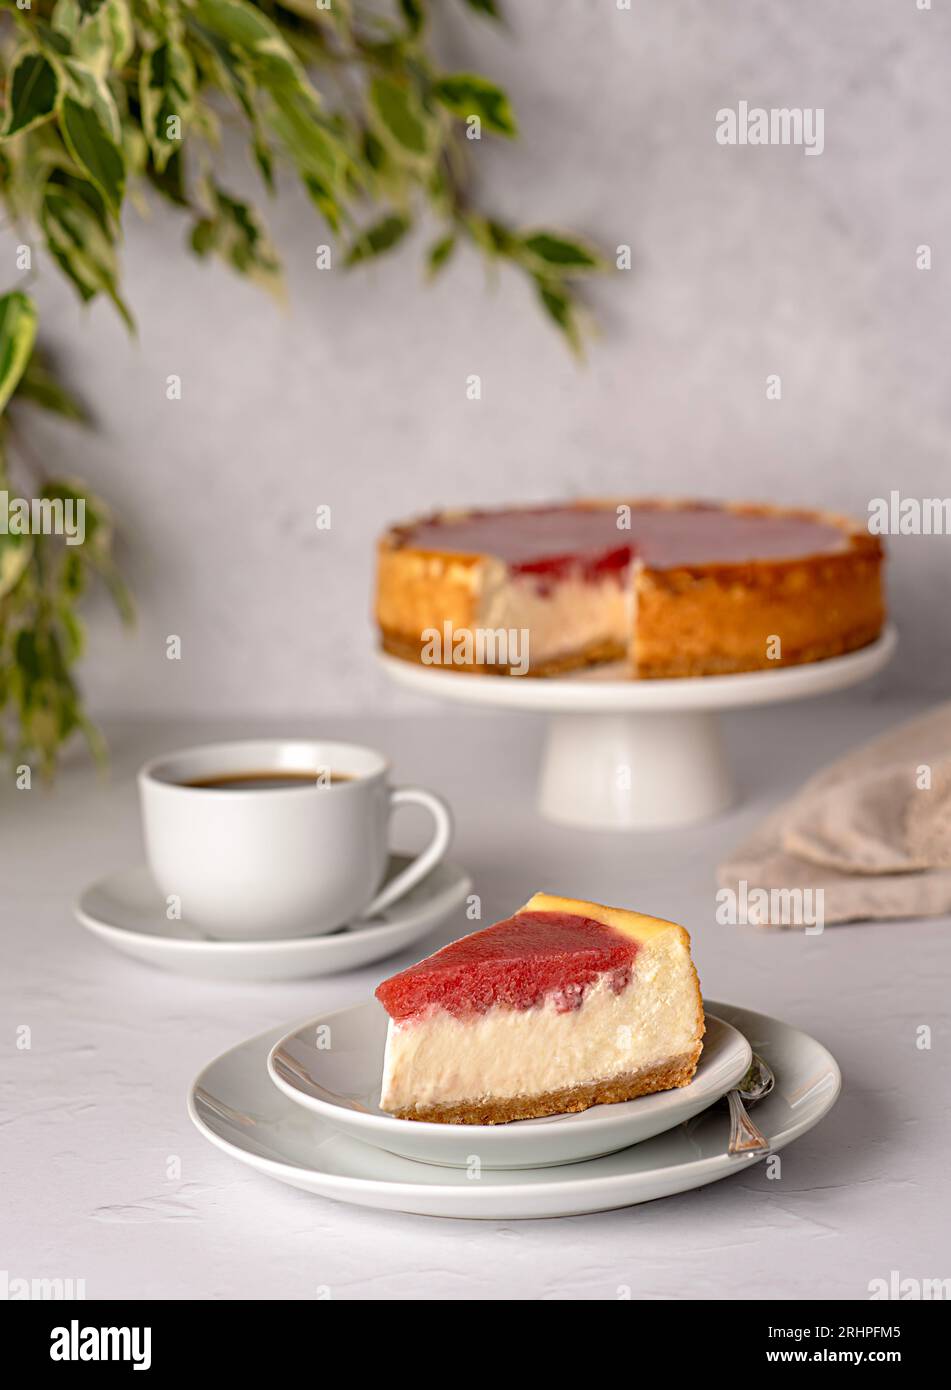 Food photography of cheesecake, cheese pie, strawberry cake, baked, tart, creamy, cream, confectionery, dessert, coffee Stock Photo